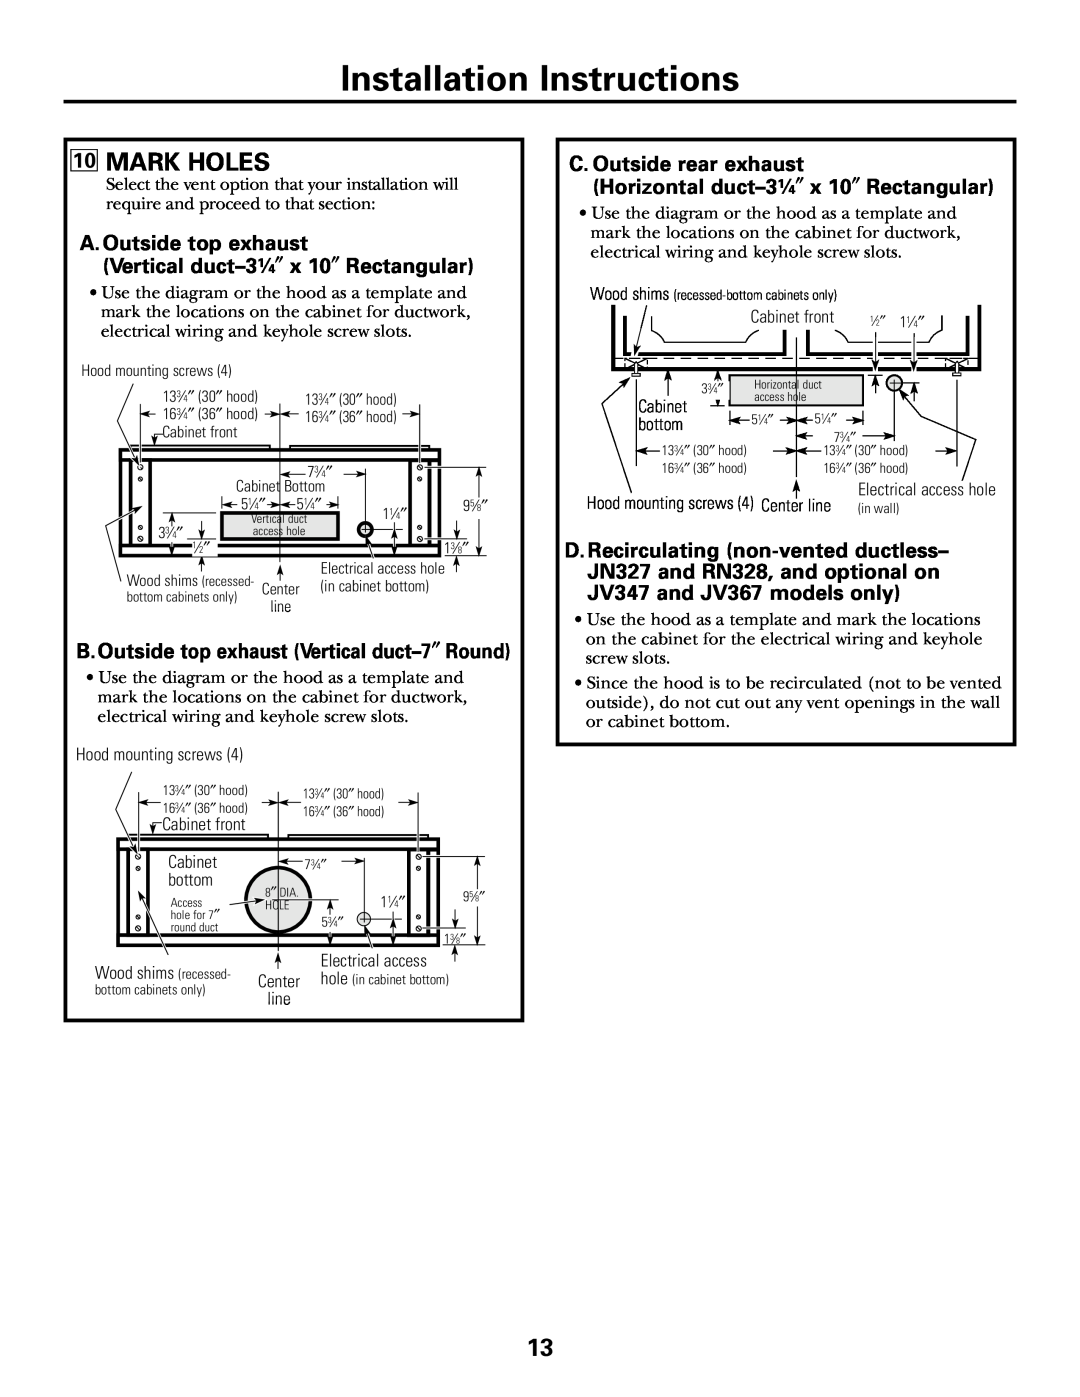 GE 164D4290P393 Mark Holes, A. Outside top exhaust Vertical duct-31⁄4″ x 10″ Rectangular, Installation Instructions 